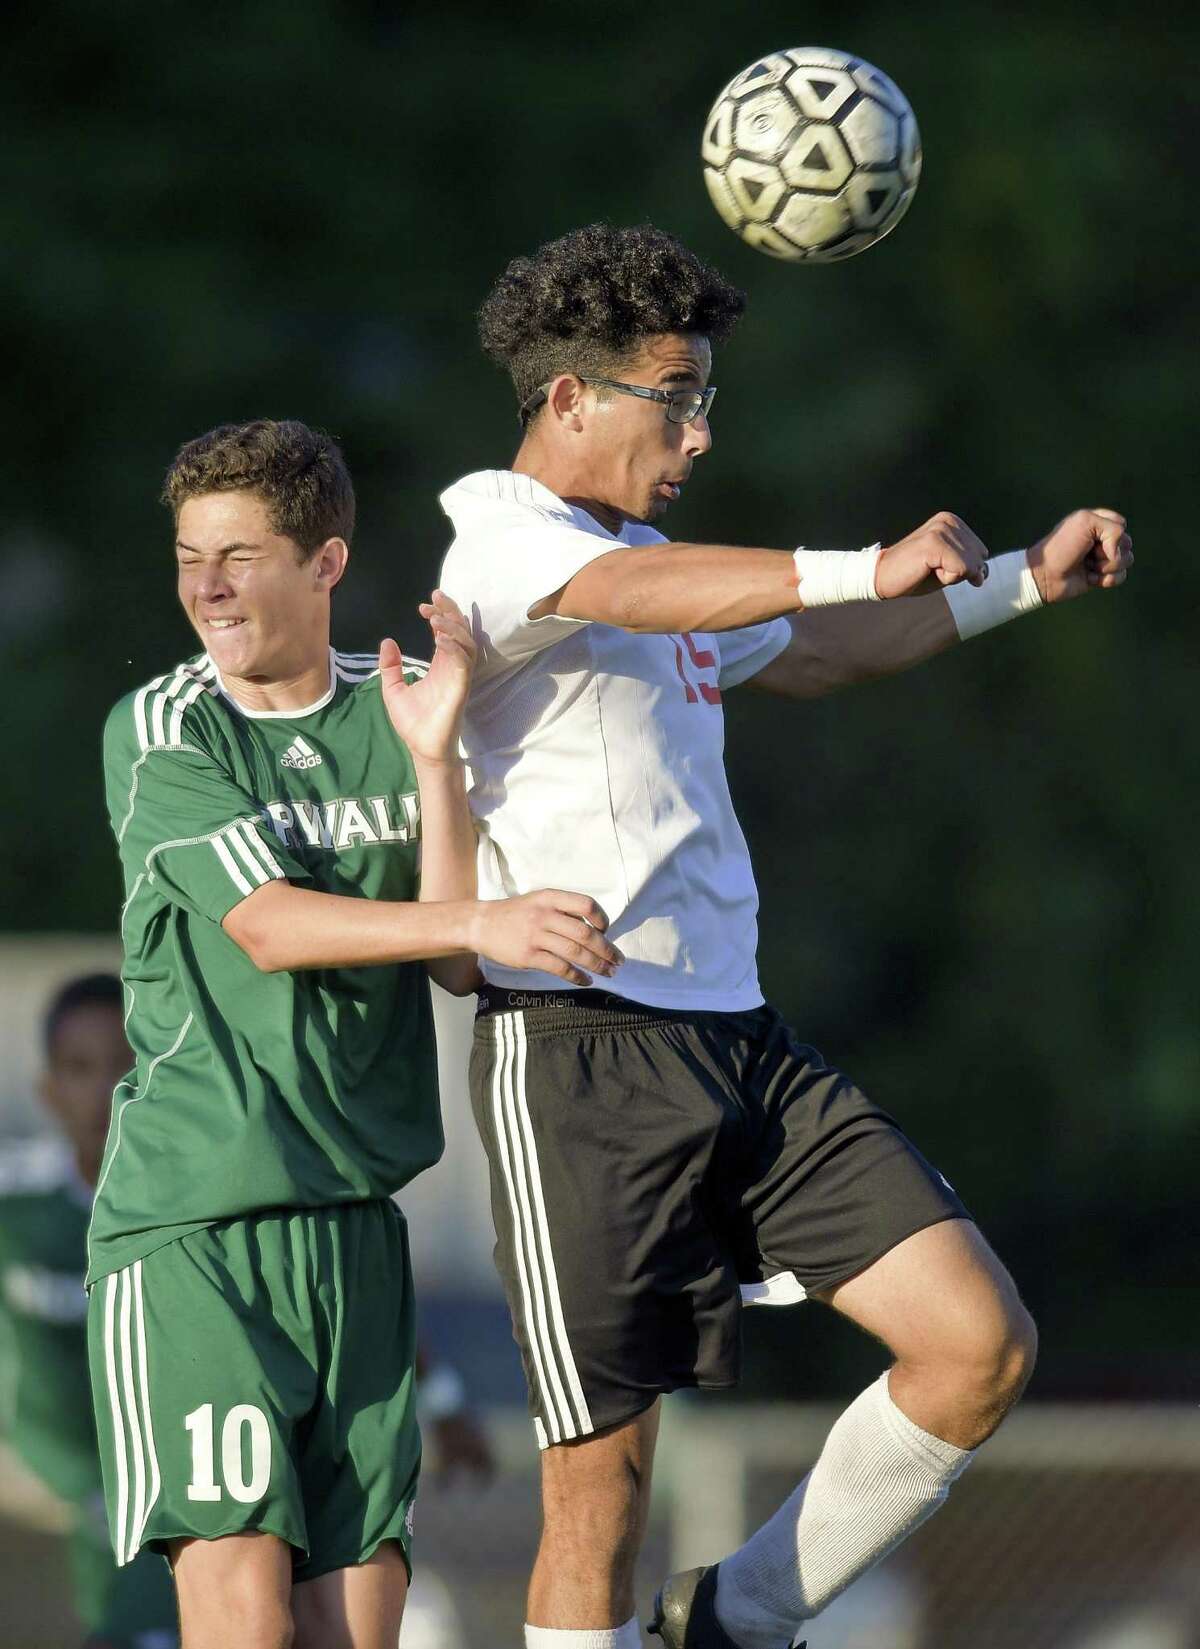 Norwalk’s Lucas Araujo (10) defends against Stamford’s Ali Essallamy (15) in a FCIAC boys soccer game at Stamford High School on Thursday, Oct. 12, 2017 in Stamford, Connecticut. Essallamy scored the winning goal late in the second half in the Black Knights 2-1 victory over Norwalk.